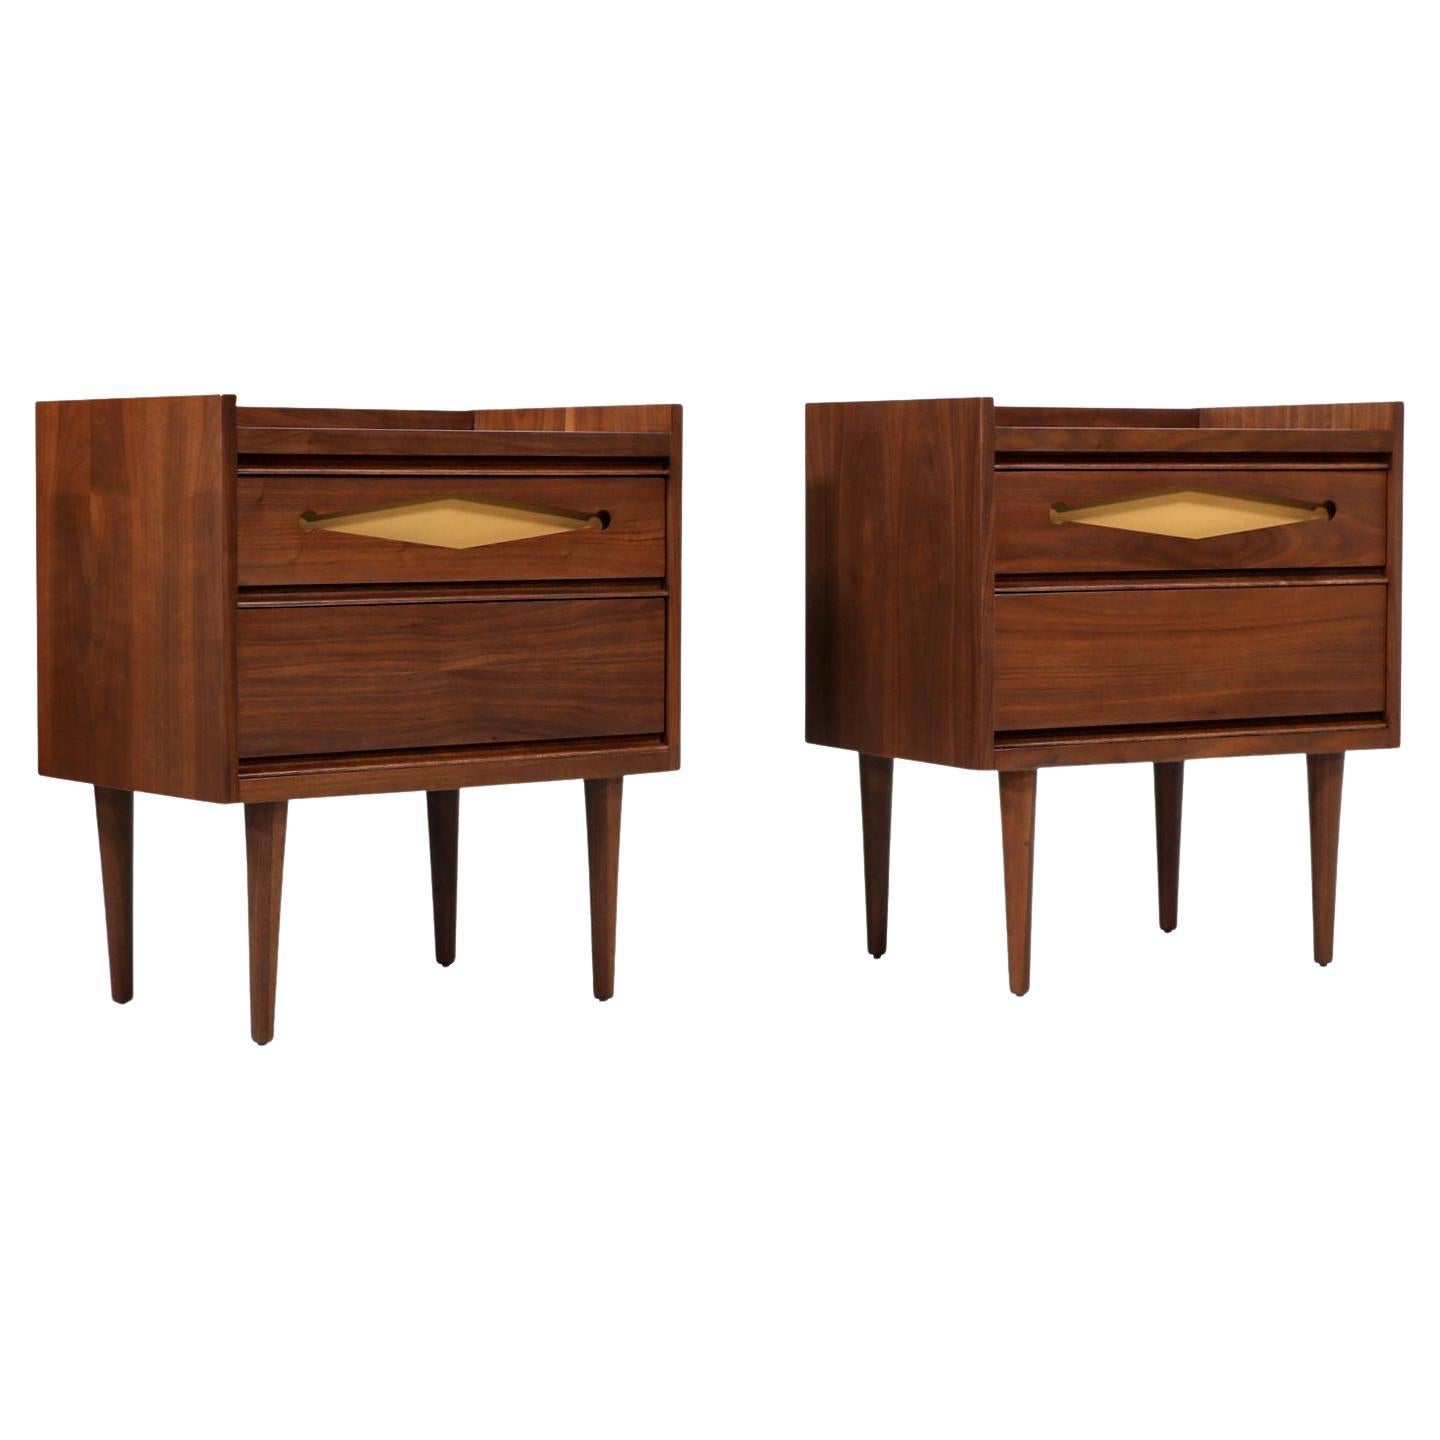 Mid-Century Modern Walnut Night Stands with Lacquered Accent Drawers